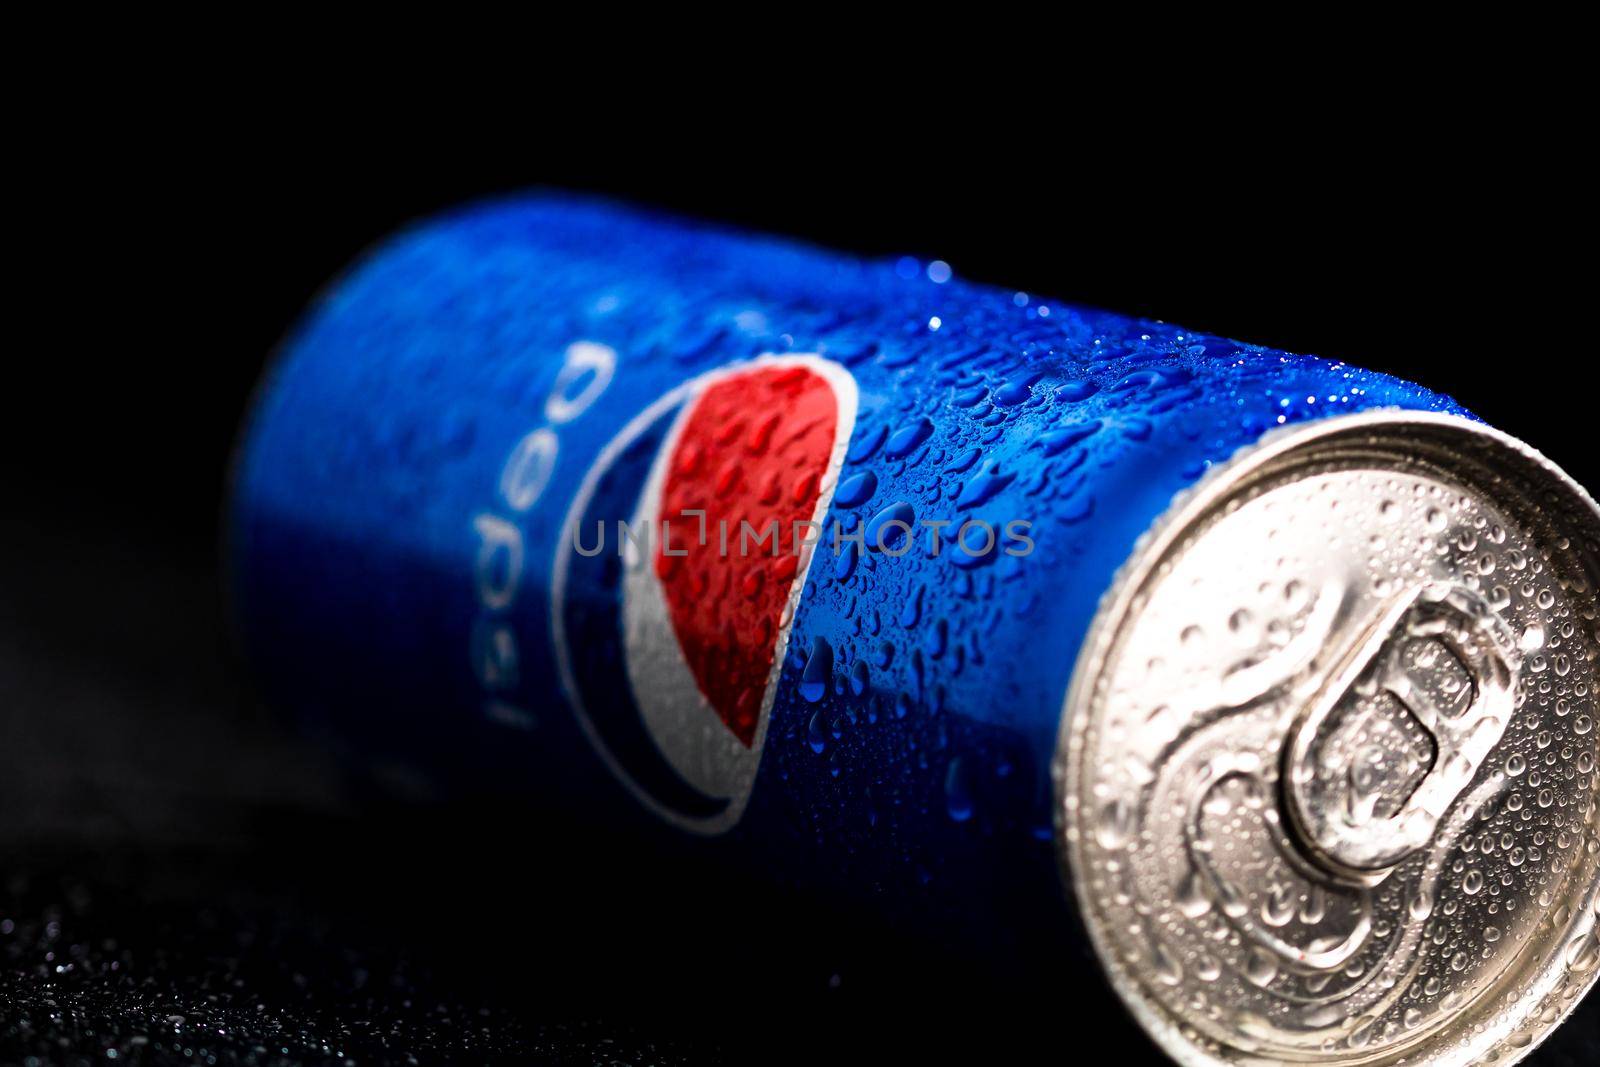 Editorial photo of Pepsi can with water droplets on black background. Studio shot in Bucharest, Romania, 2021 by vladispas